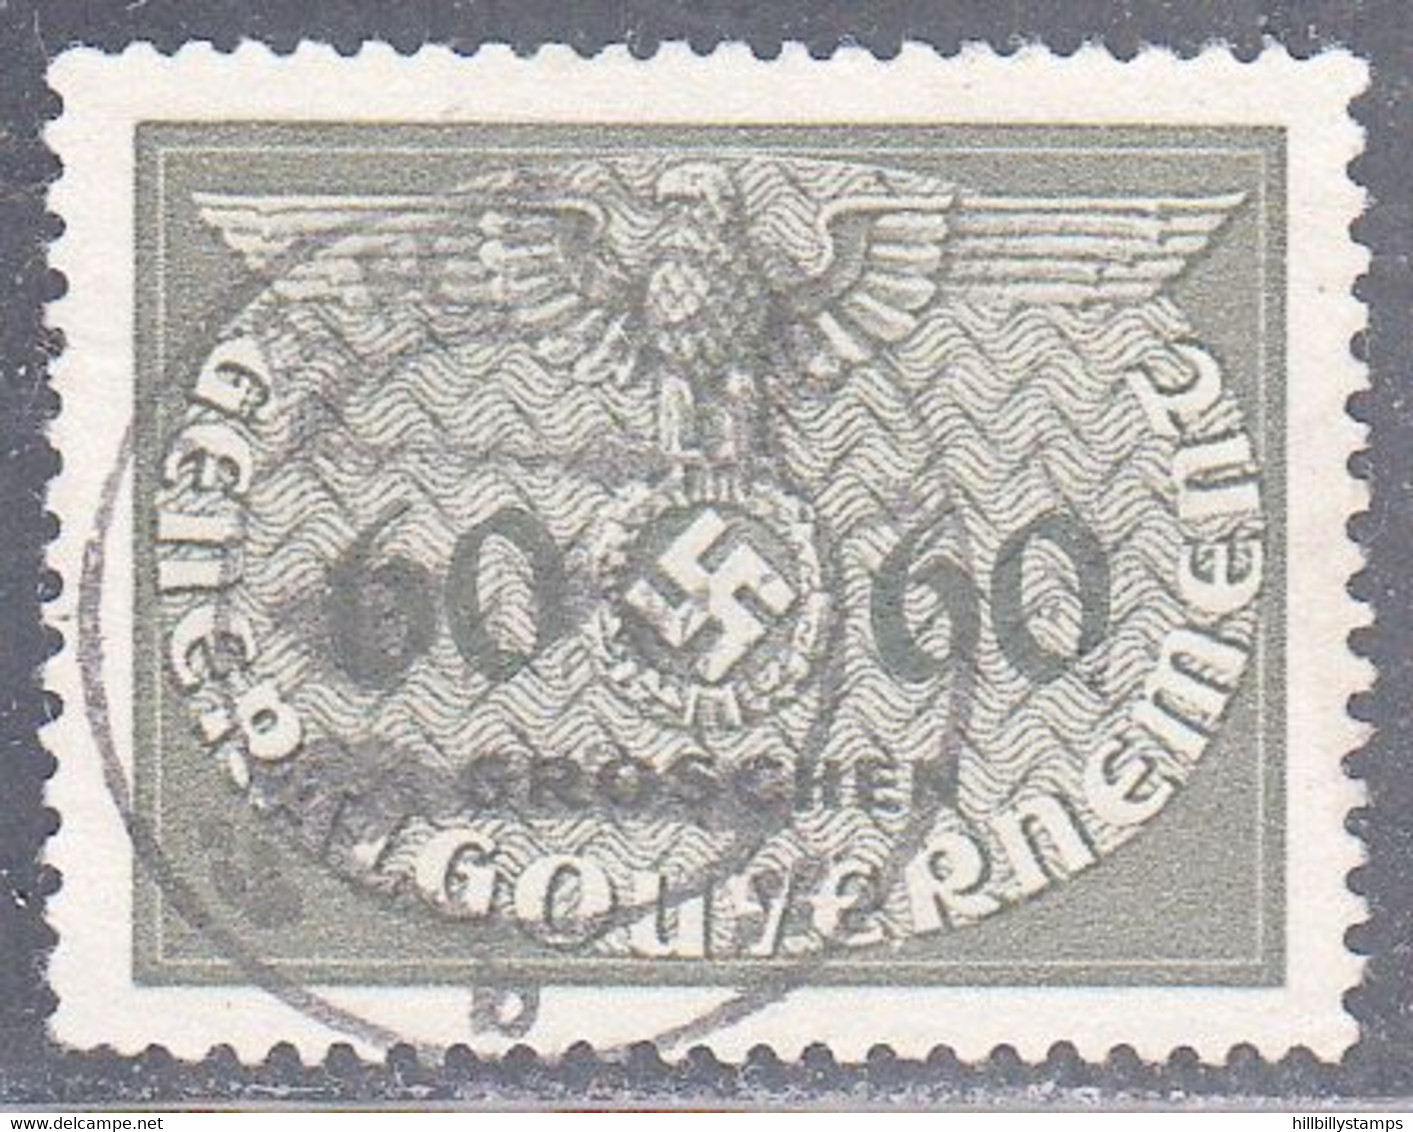 POLAND GENERAL GOVERNMENT   SCOTT NO N011   USED    YEAR   1940 - Gouvernement Général